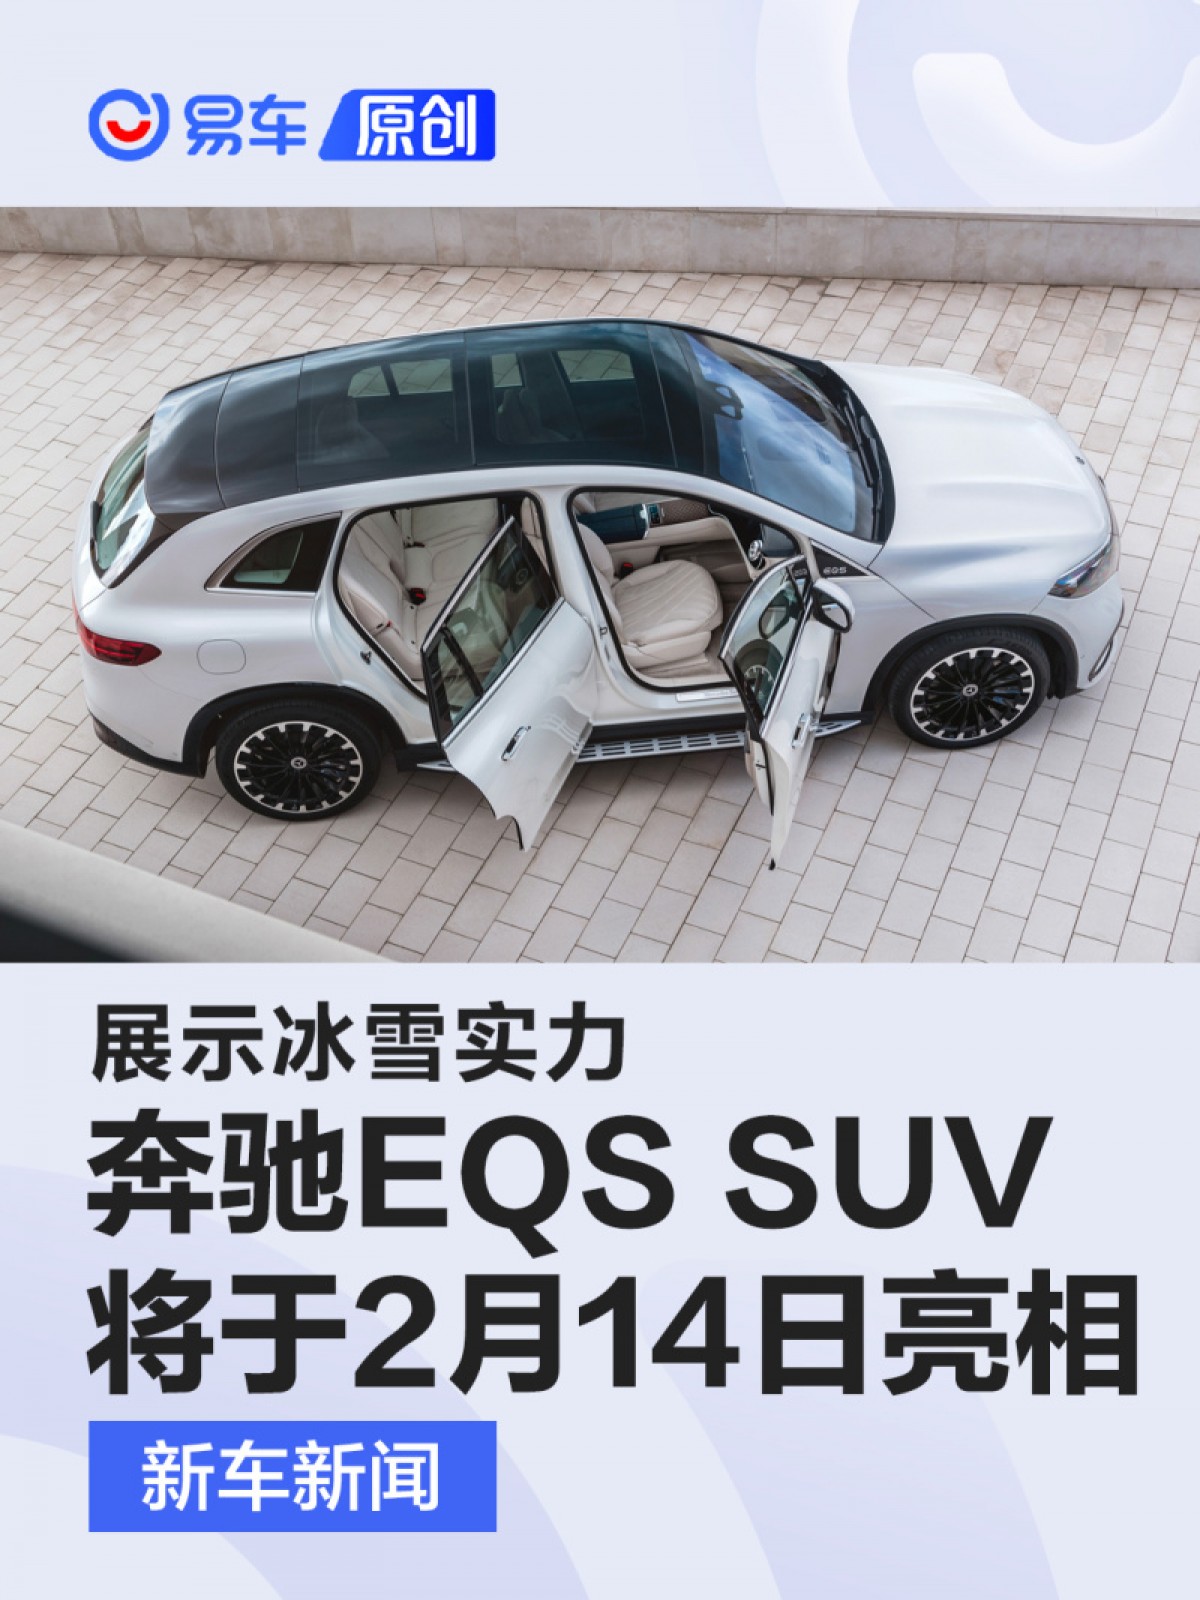 Mercedes EQS SUV is coming to China on Valentines Day